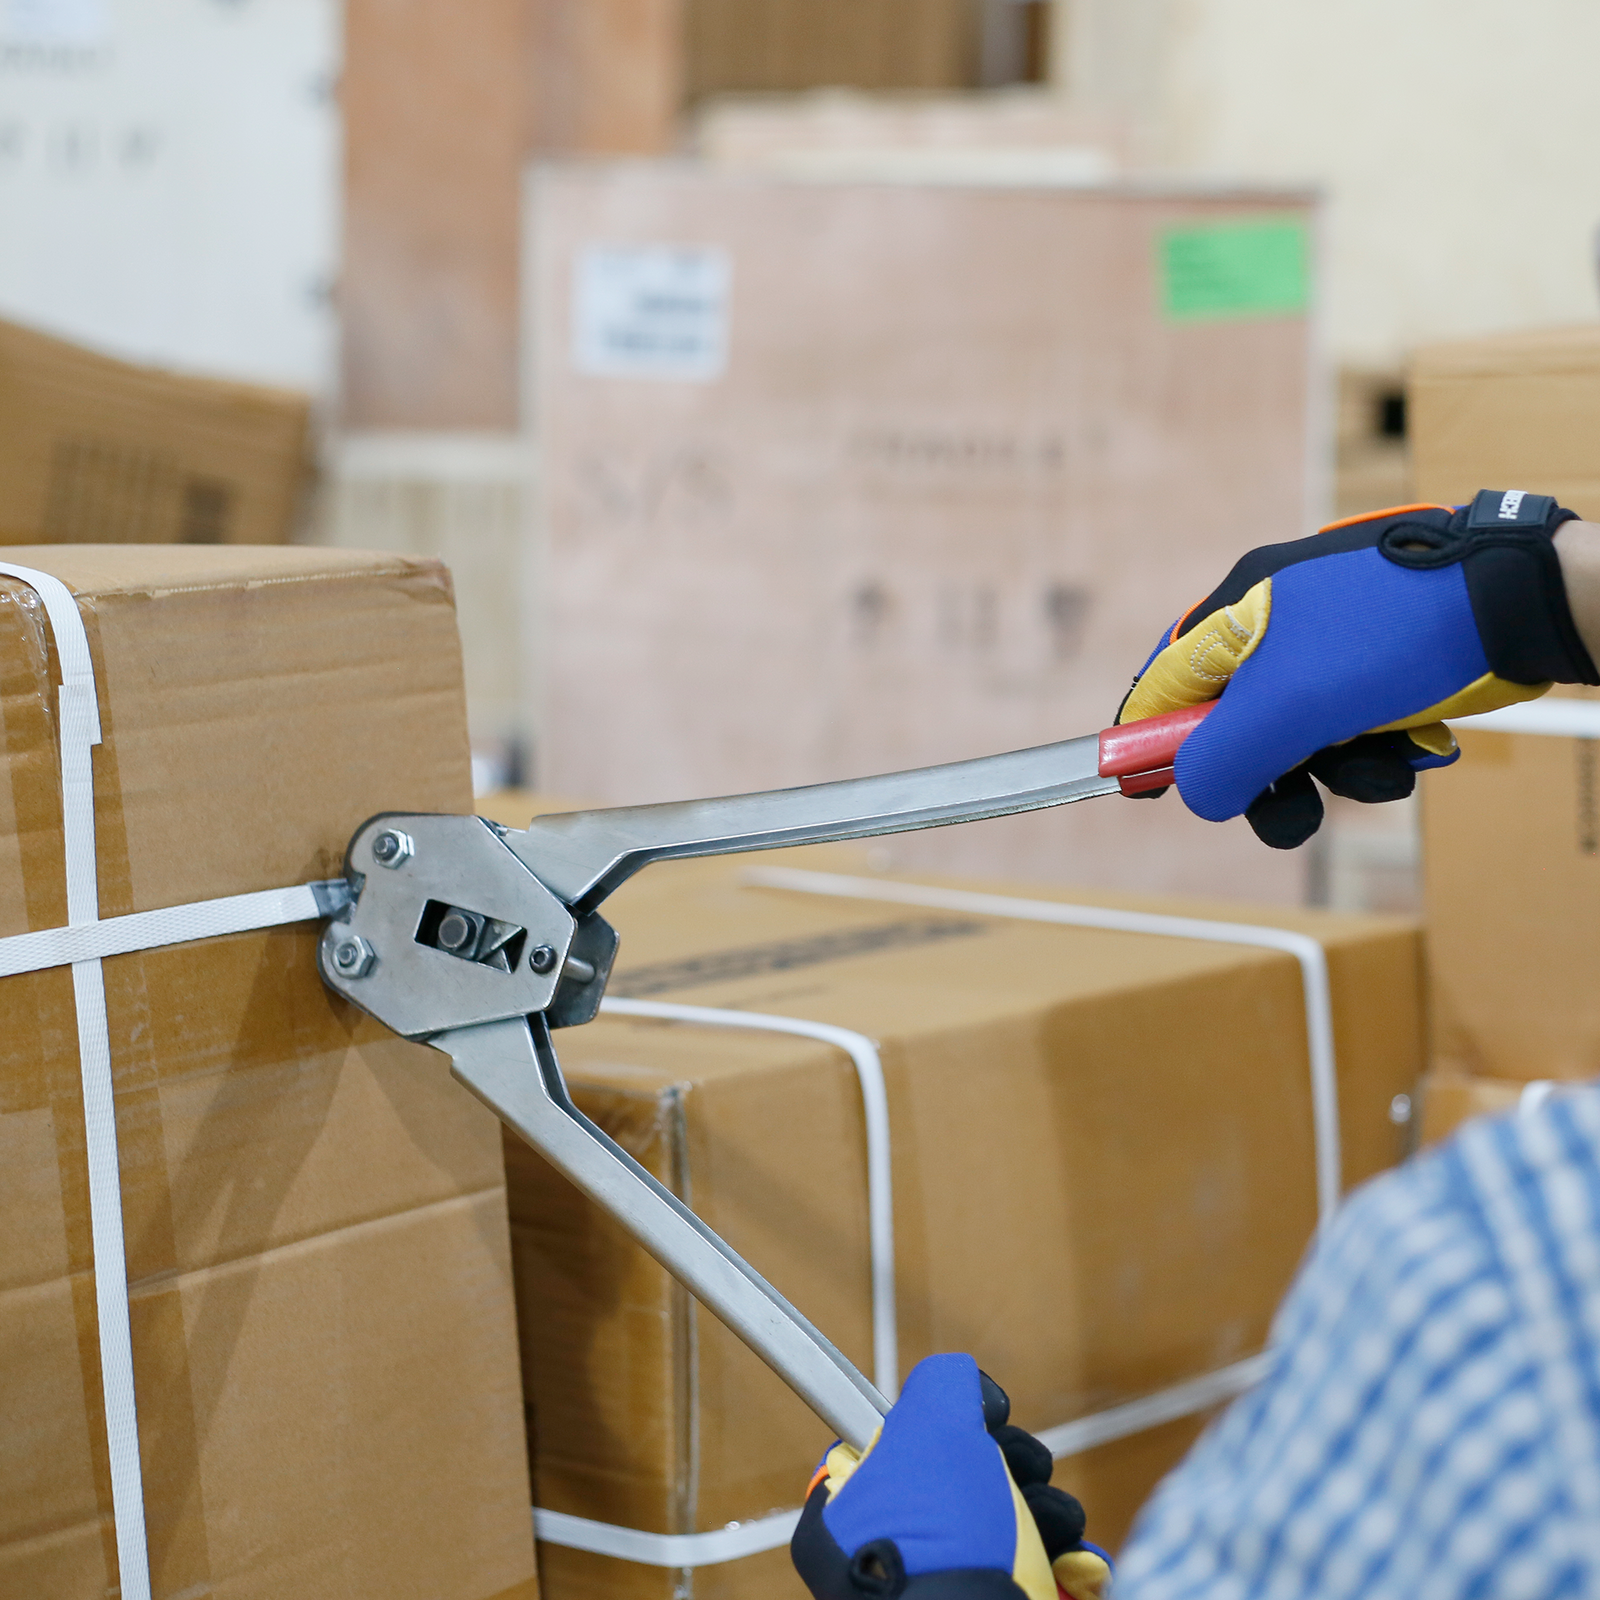 Worker wearing blue and yellow protective gloves. He is using a Manual Poly Strapping Crimper to secure a steel strapping seal on the white poly strap around many carton boxes